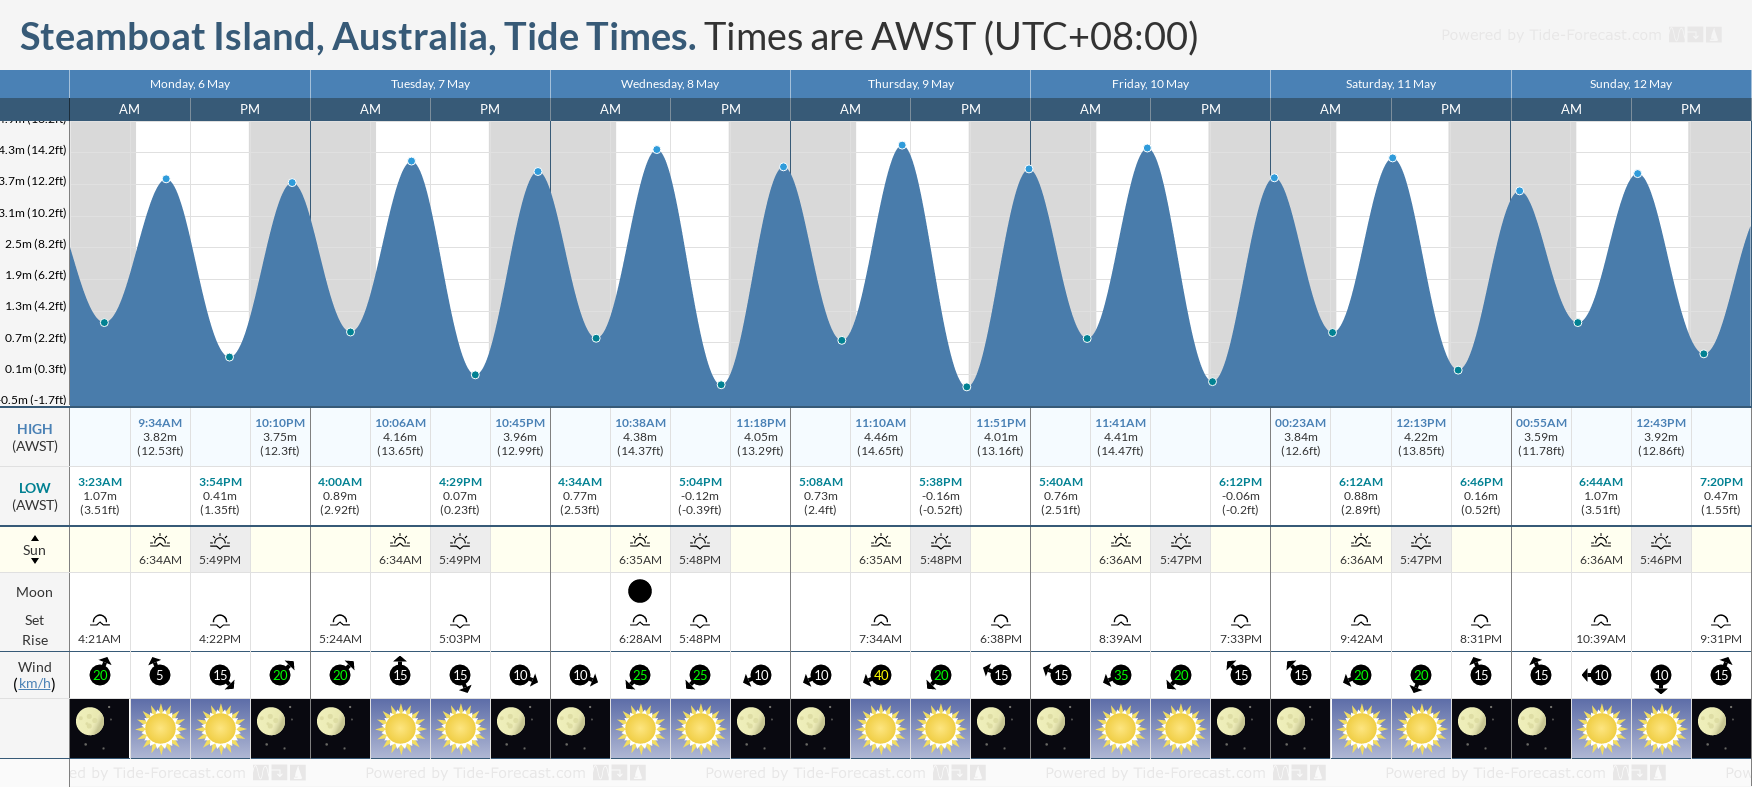 Steamboat Island, Australia Tide Chart including high and low tide tide times for the next 7 days